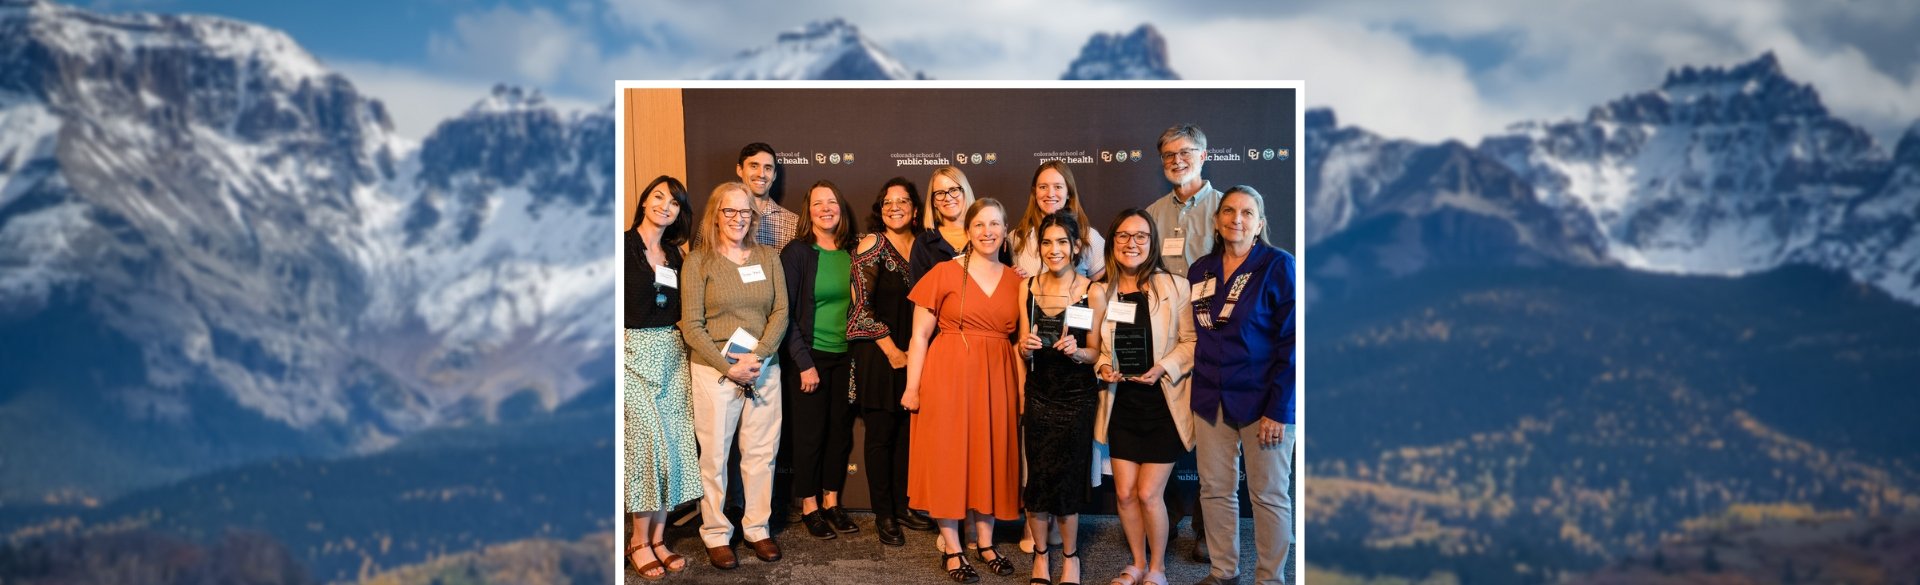 Award recipients lined up smiling with mountain background